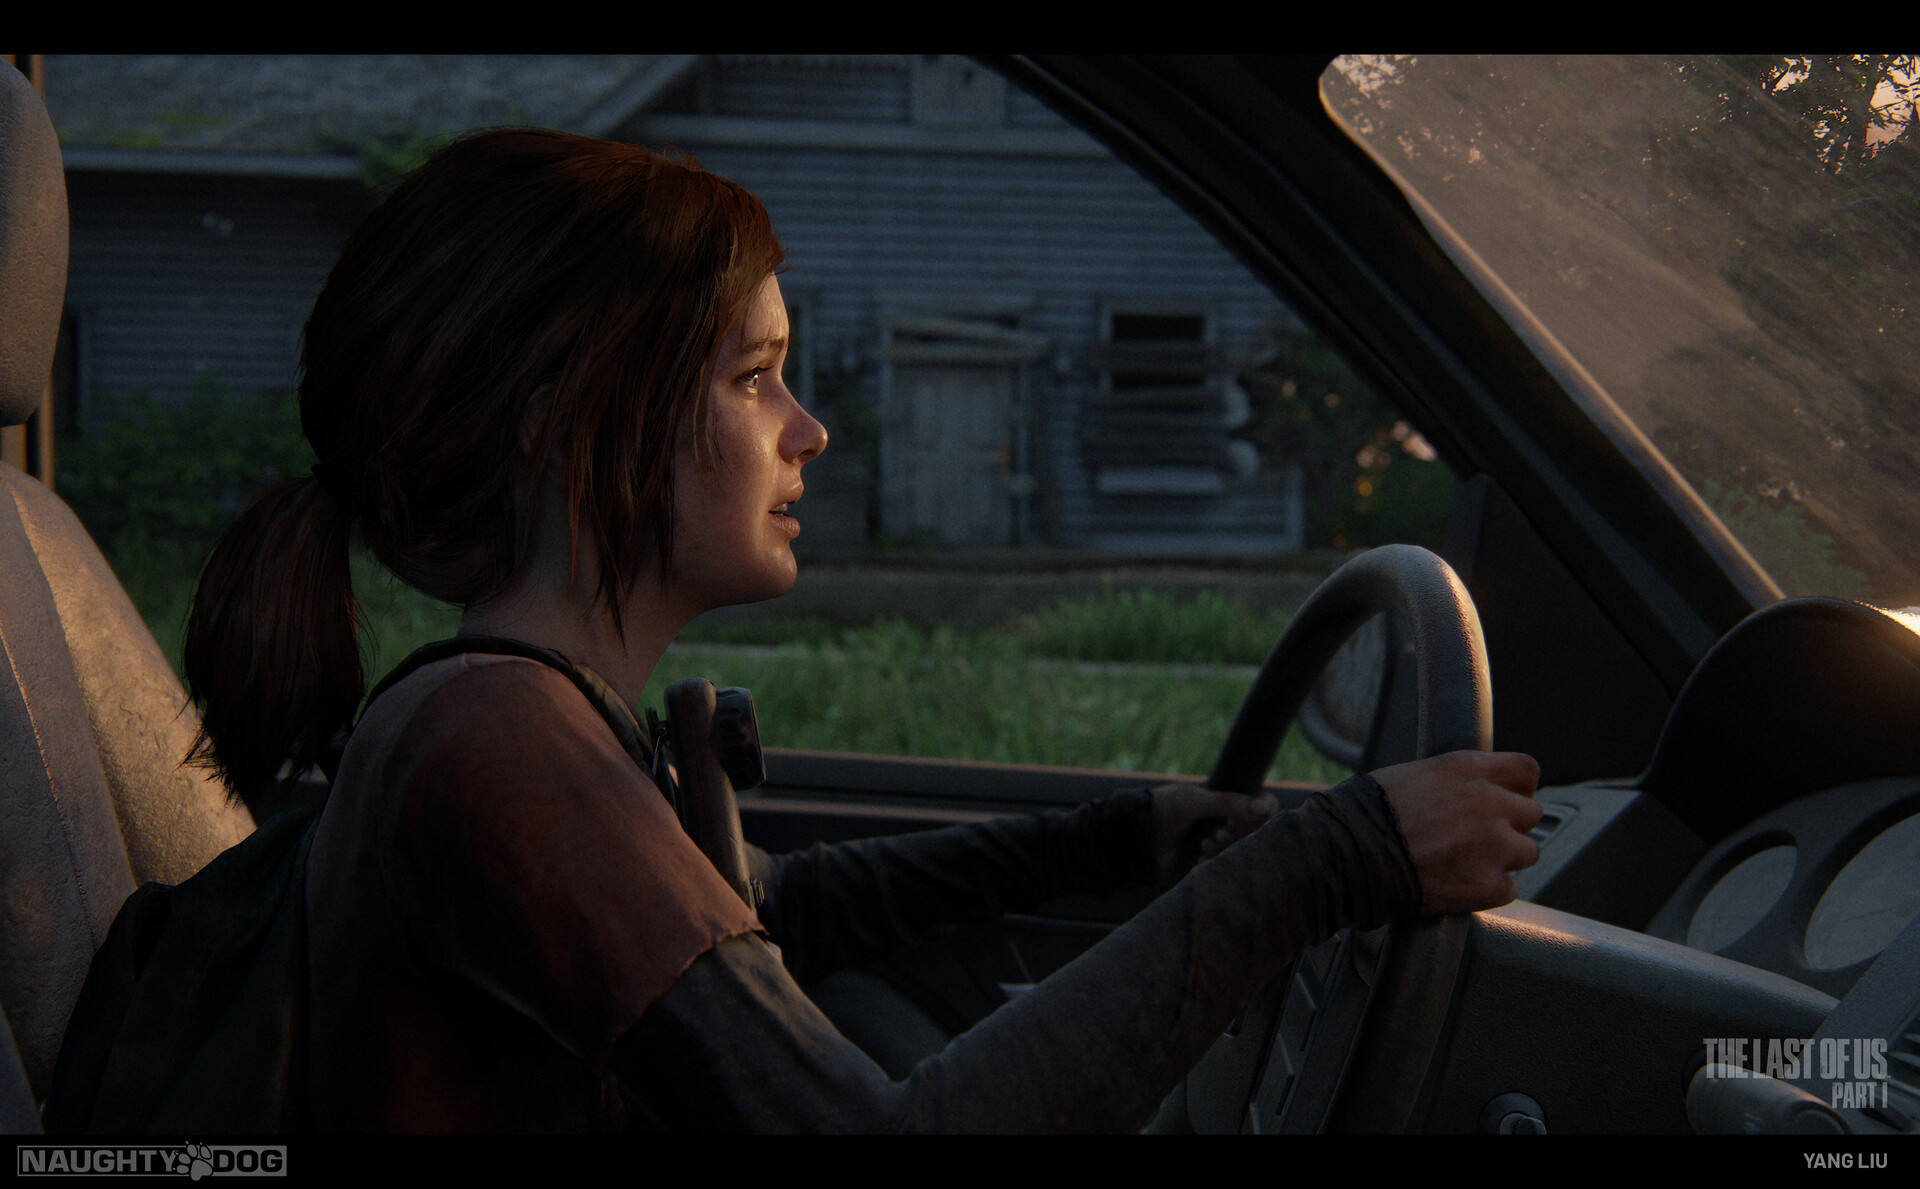 Ellie Williams, The Last of Us, PlayStation, Playstation 5, video games,  car, video game art, city, car wreck, taxi, ruins, apocalyptic